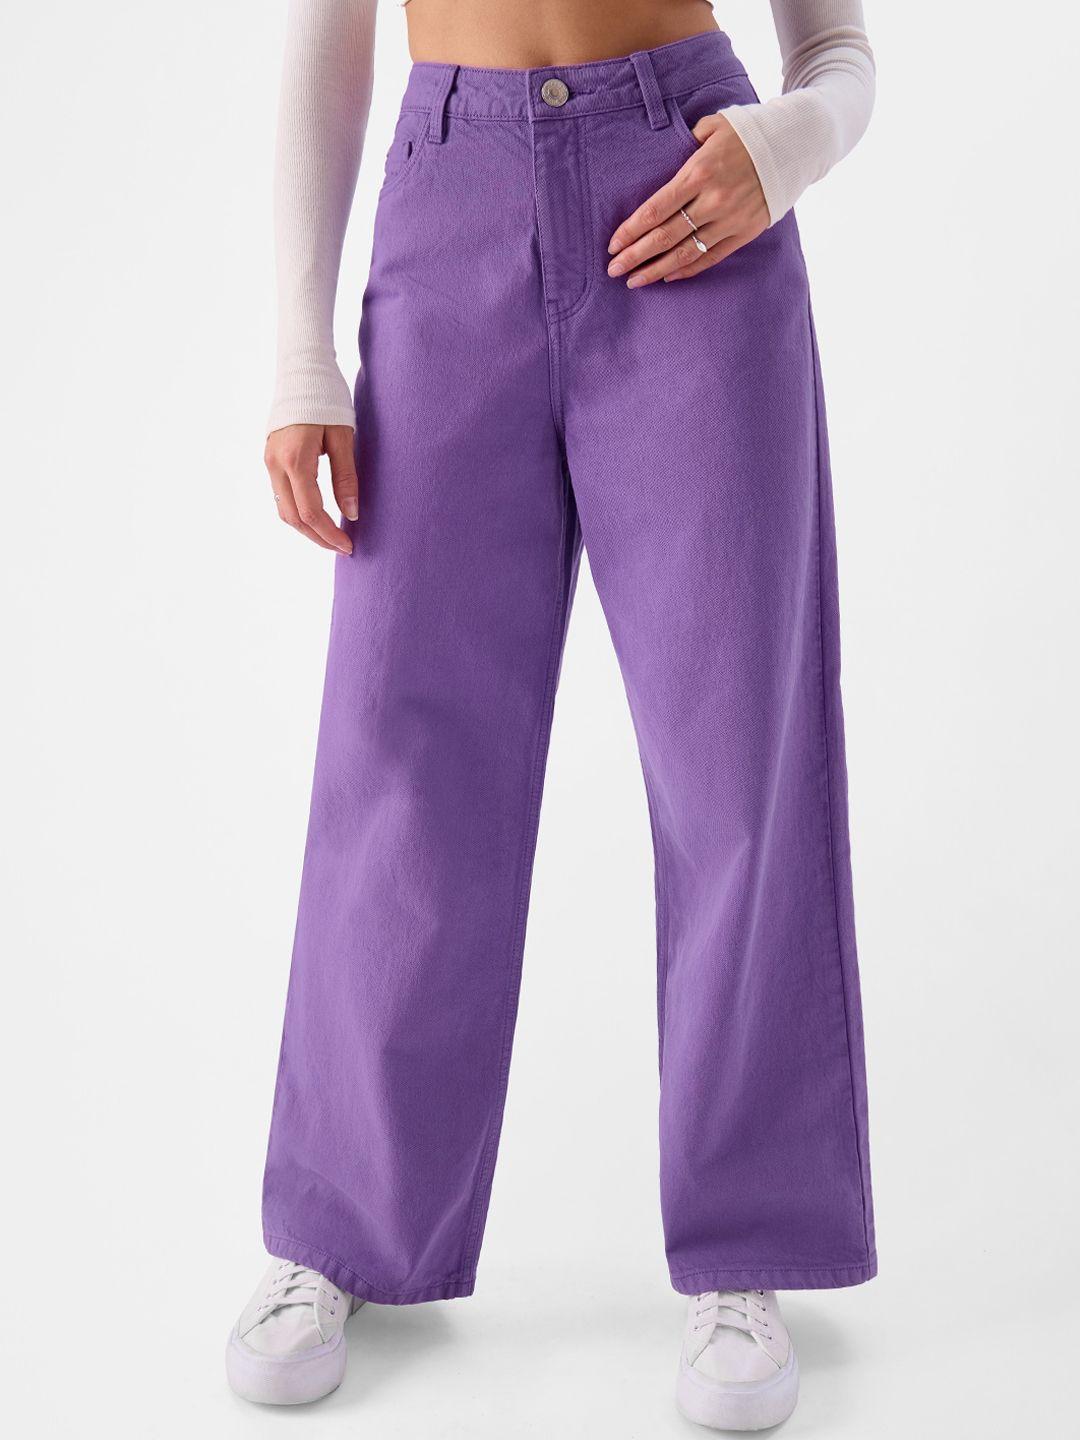 the souled store women violet clean look wide leg jeans